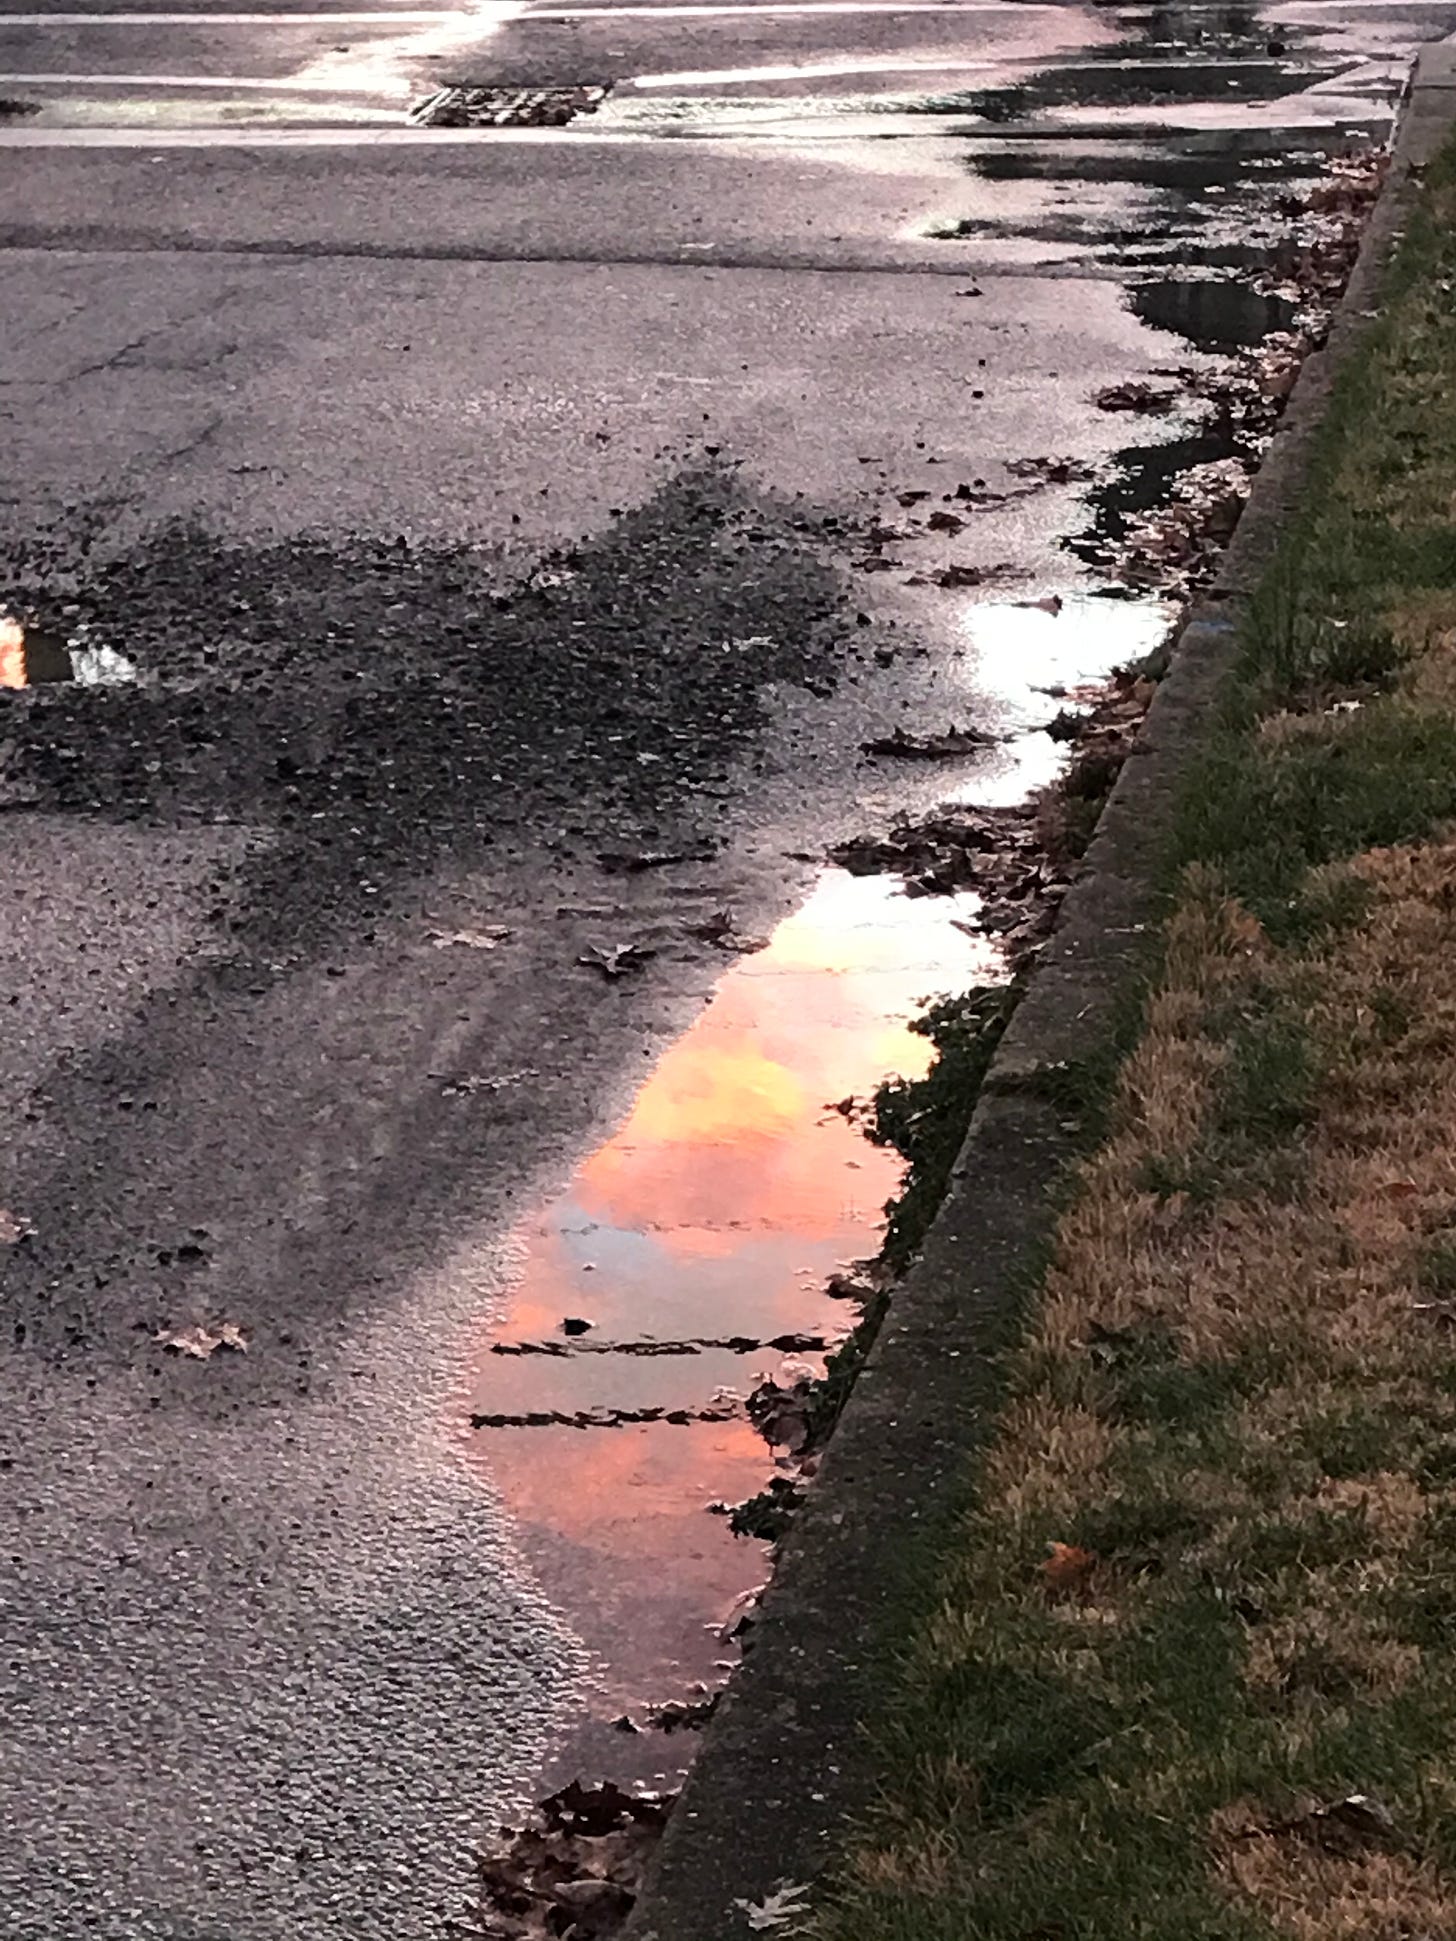 A gold and yellow sunset in a dingy puddle on the street.